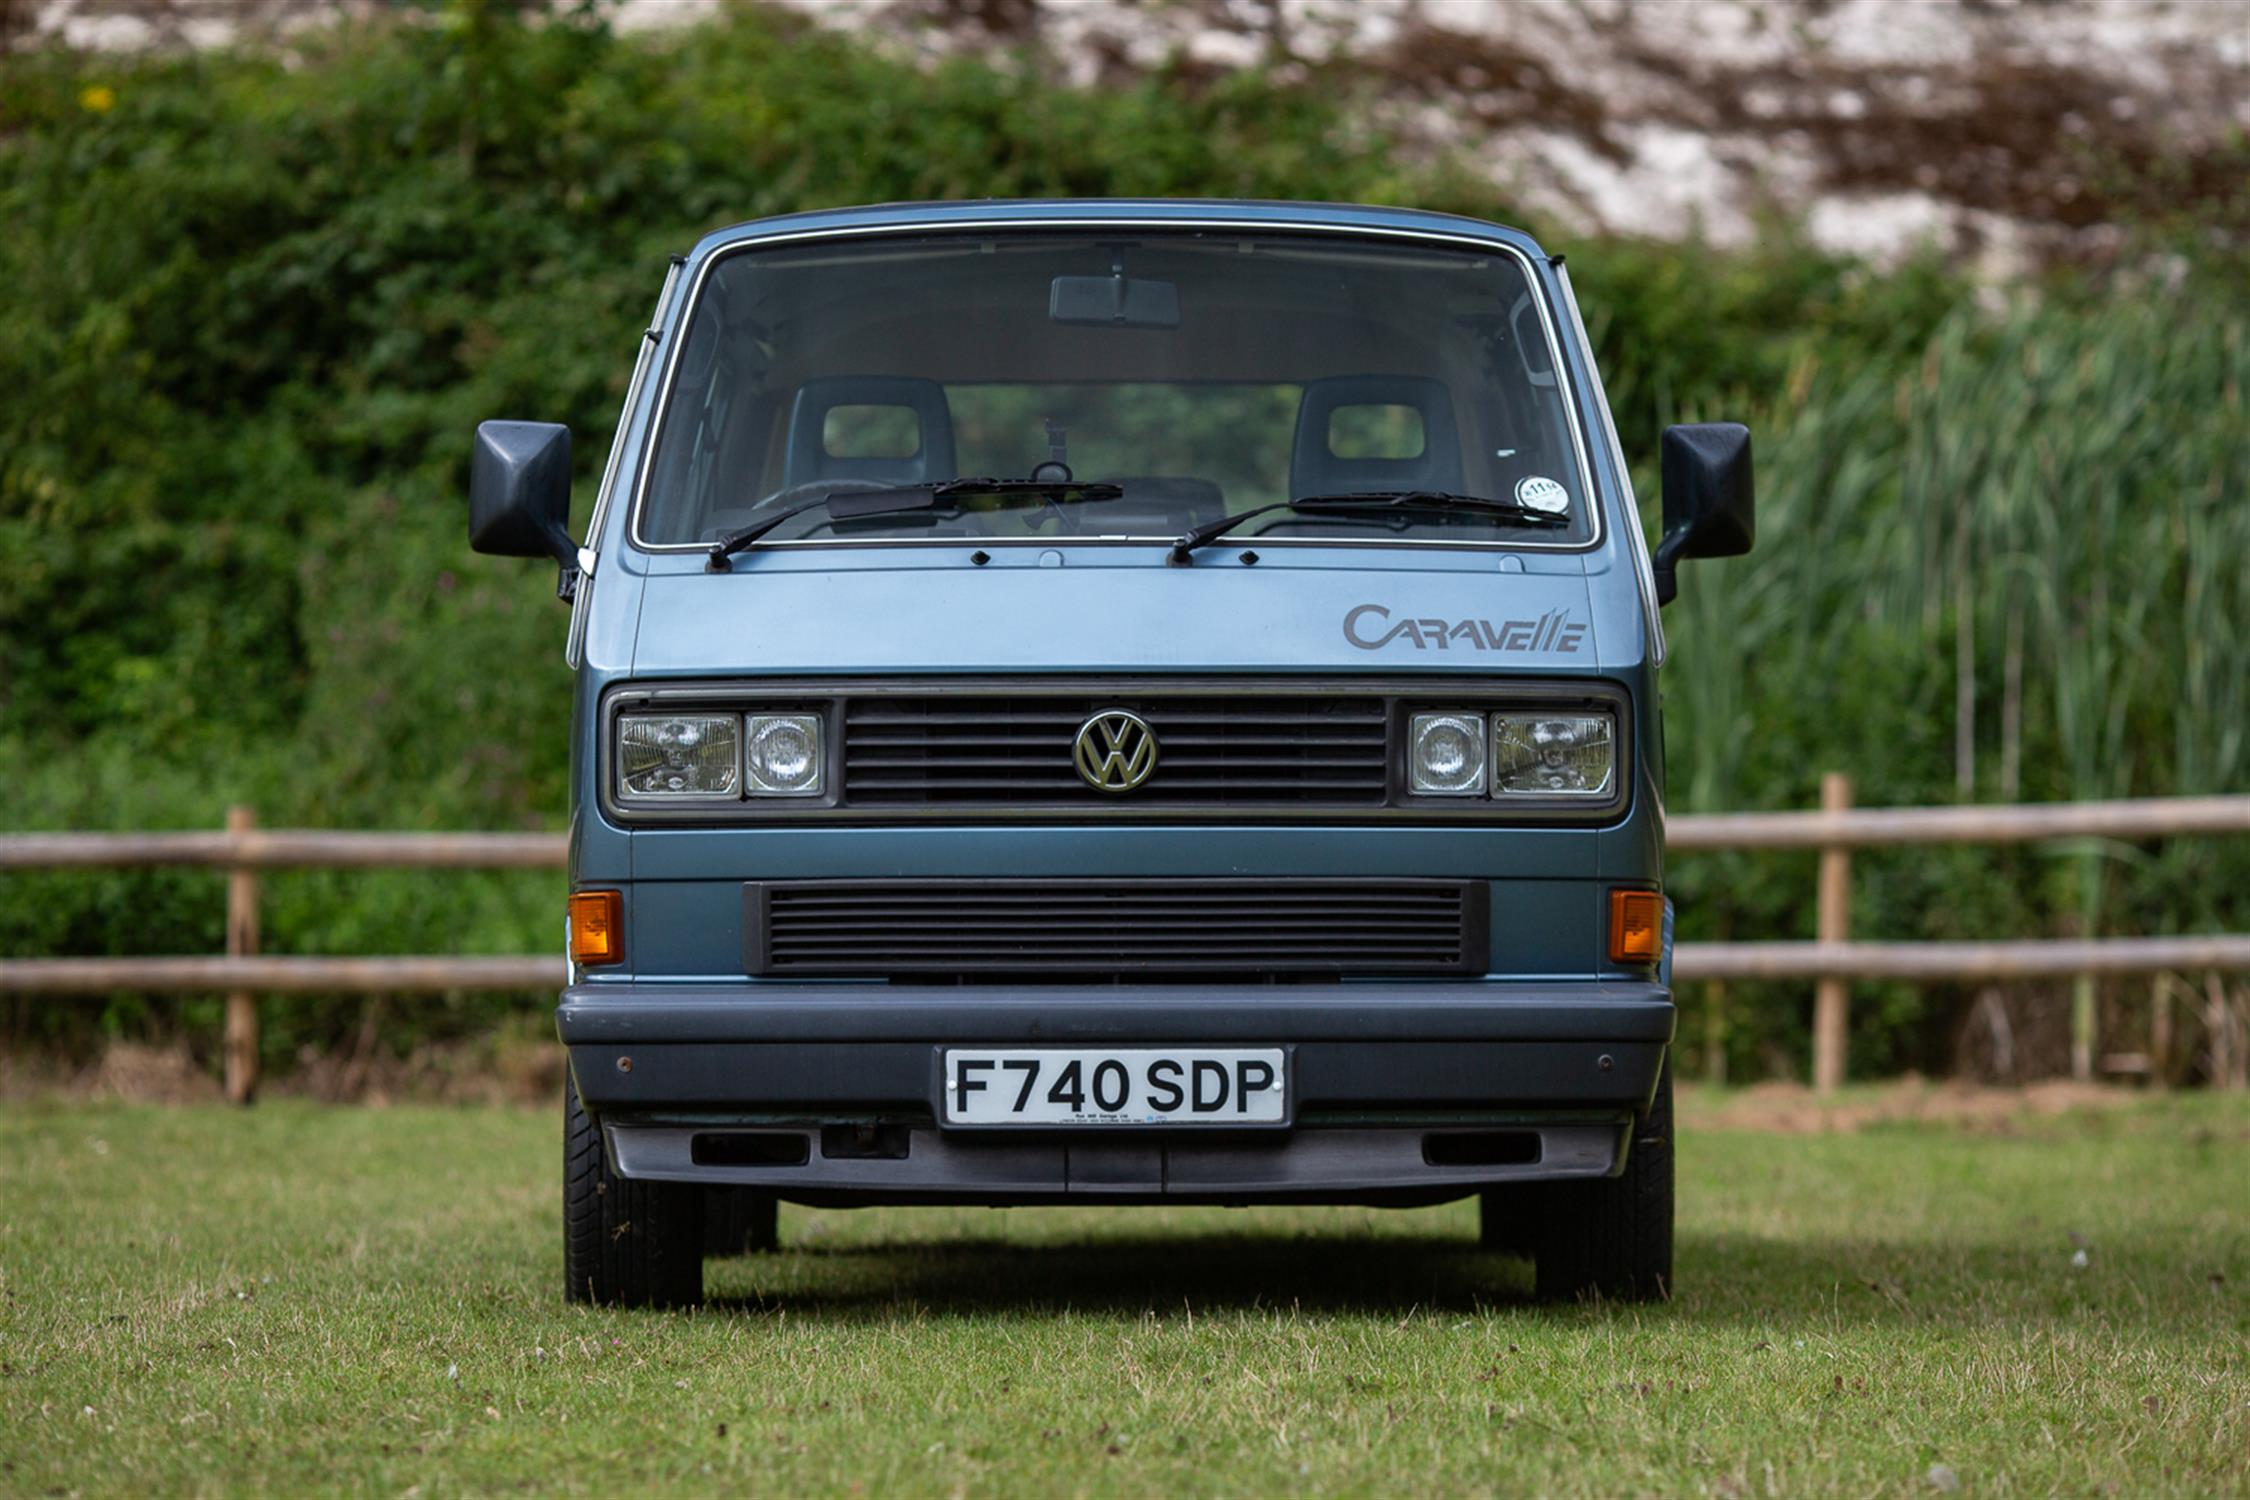 1989 Volkswagen Caravelle T3/Type 25 - 18,495 miles from new - Image 6 of 10